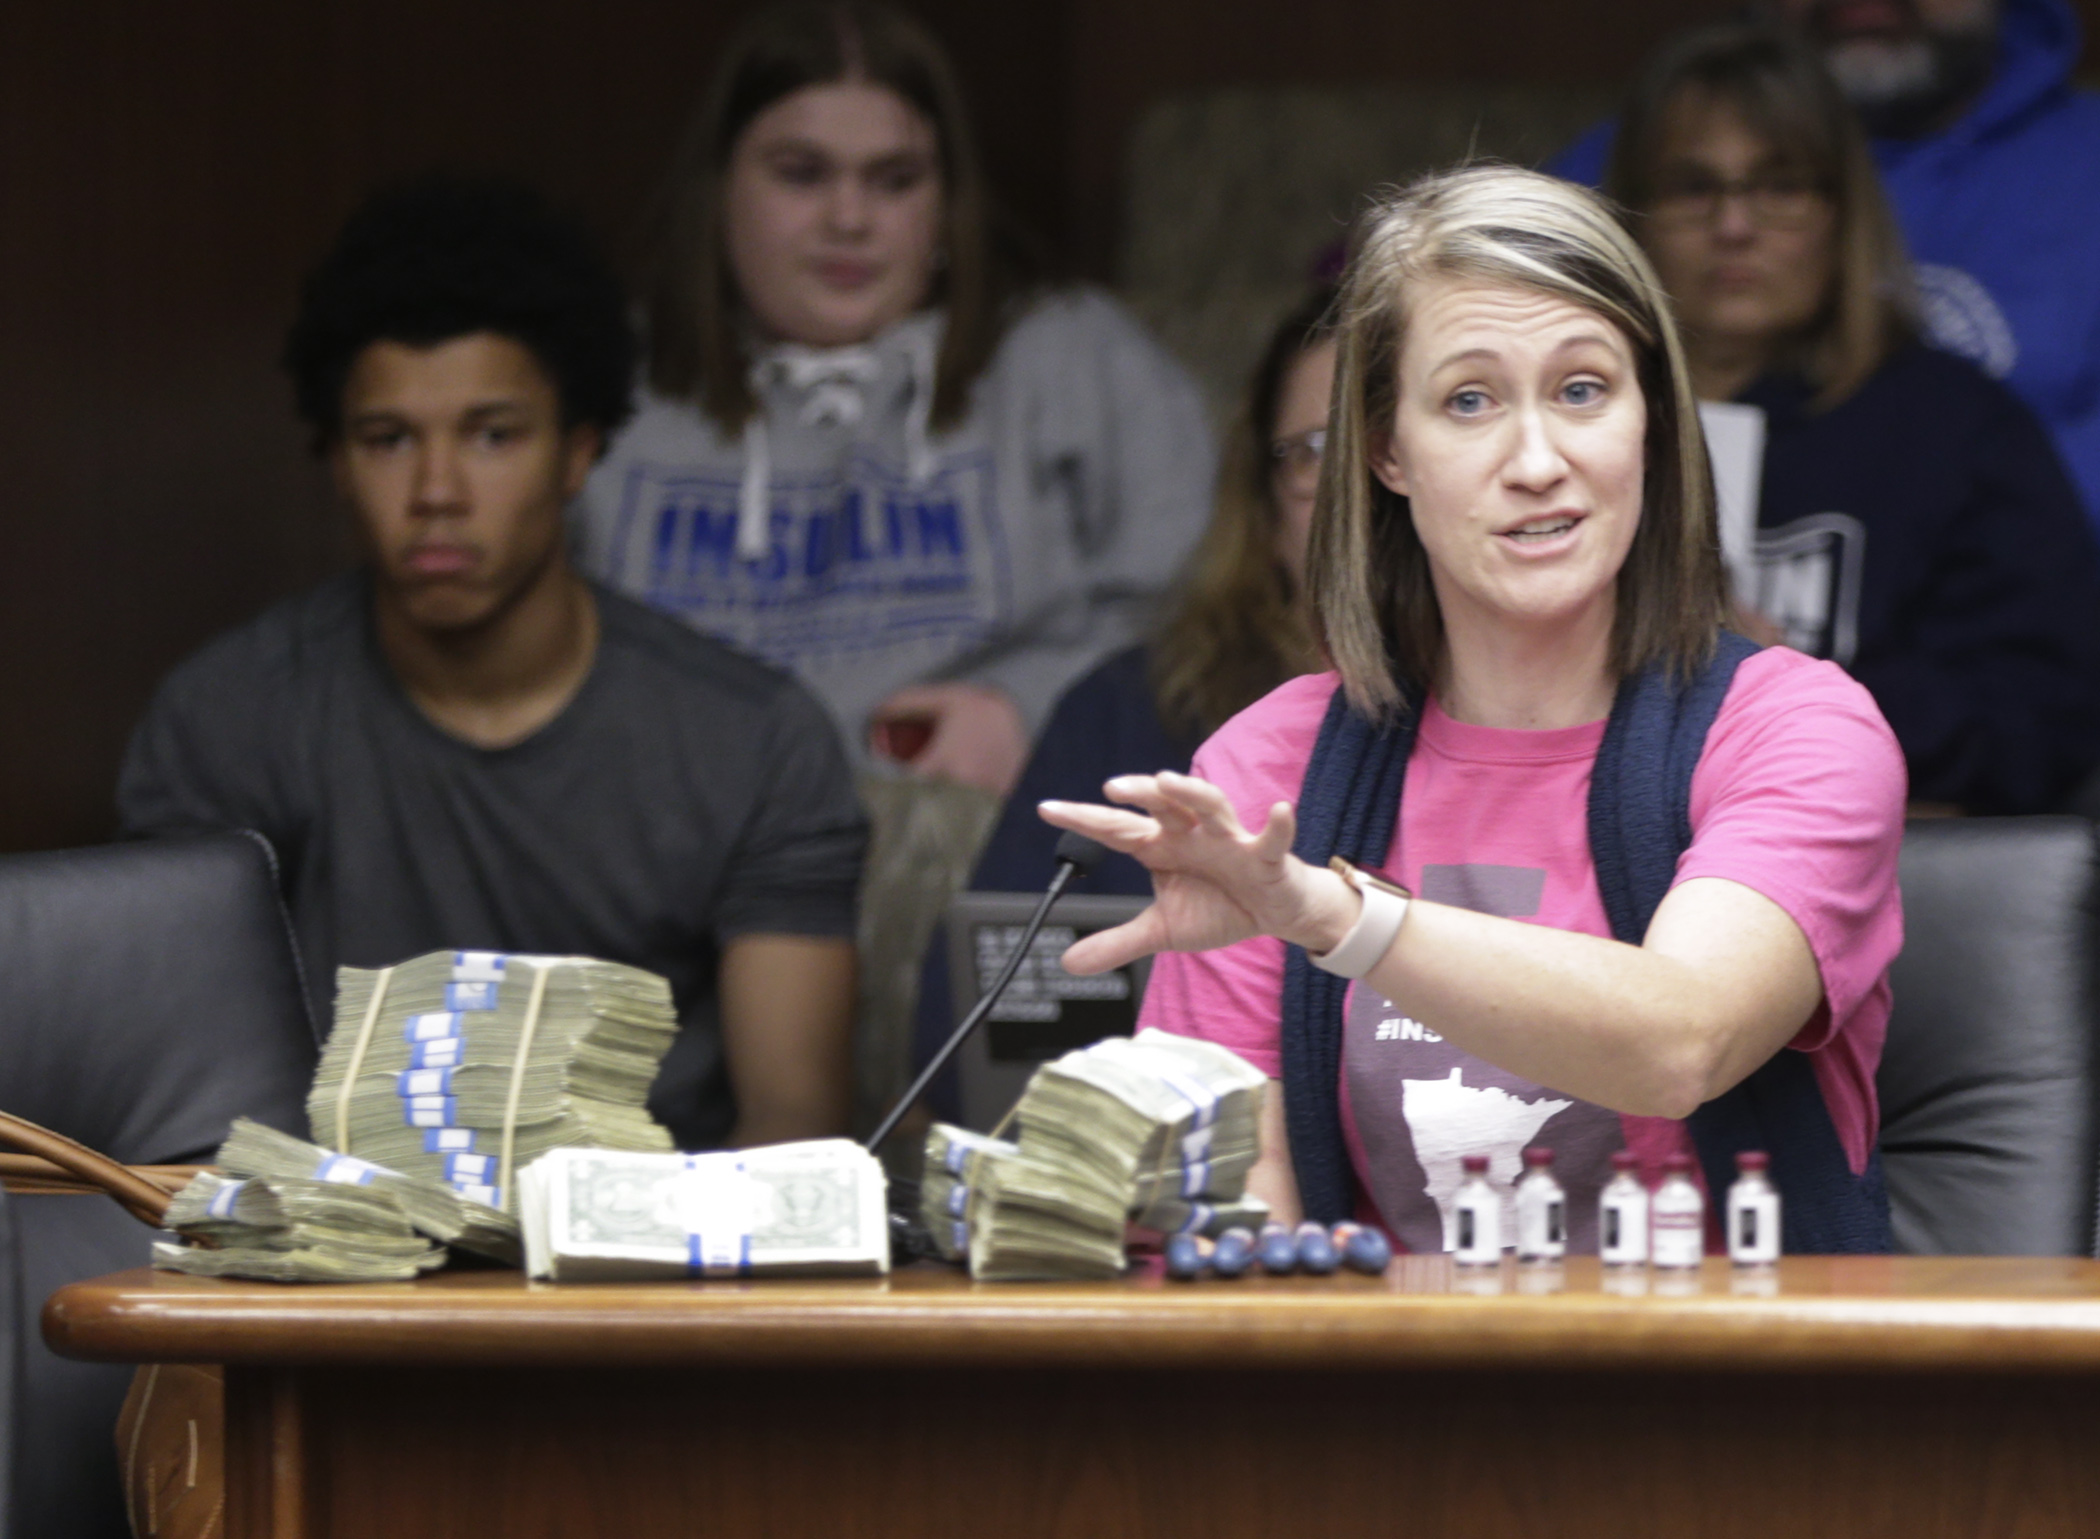 Shari Wiltrout, the mother of two type-one diabetic teenage daughters, displays a one month supply of their insulin, and the amount of cash that it costs, during her testimony on HF3100 in the House Commerce Committee Feb. 11. Photo by Paul Battaglia